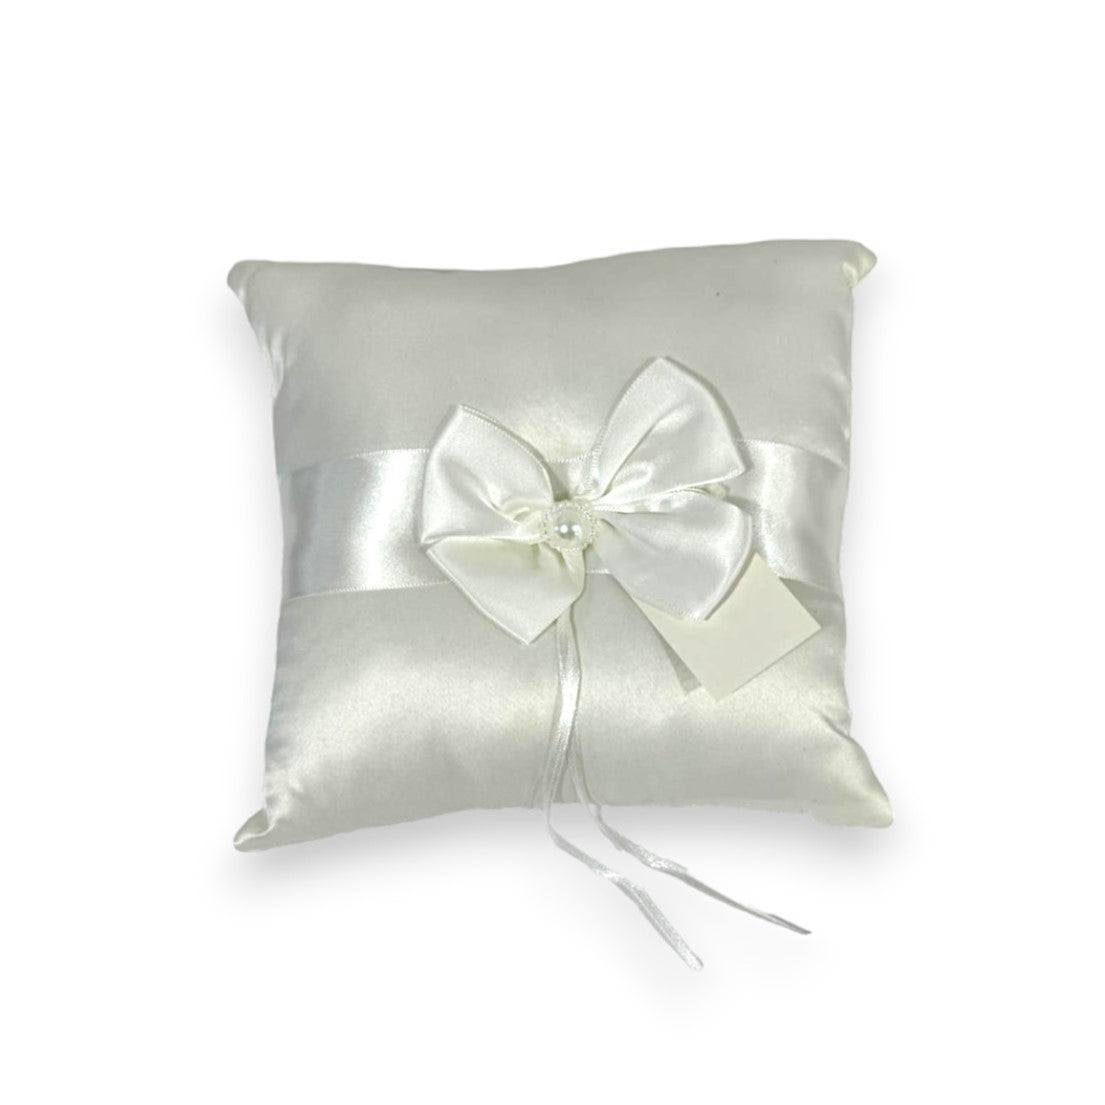 PEARL BOW RING PILLOW